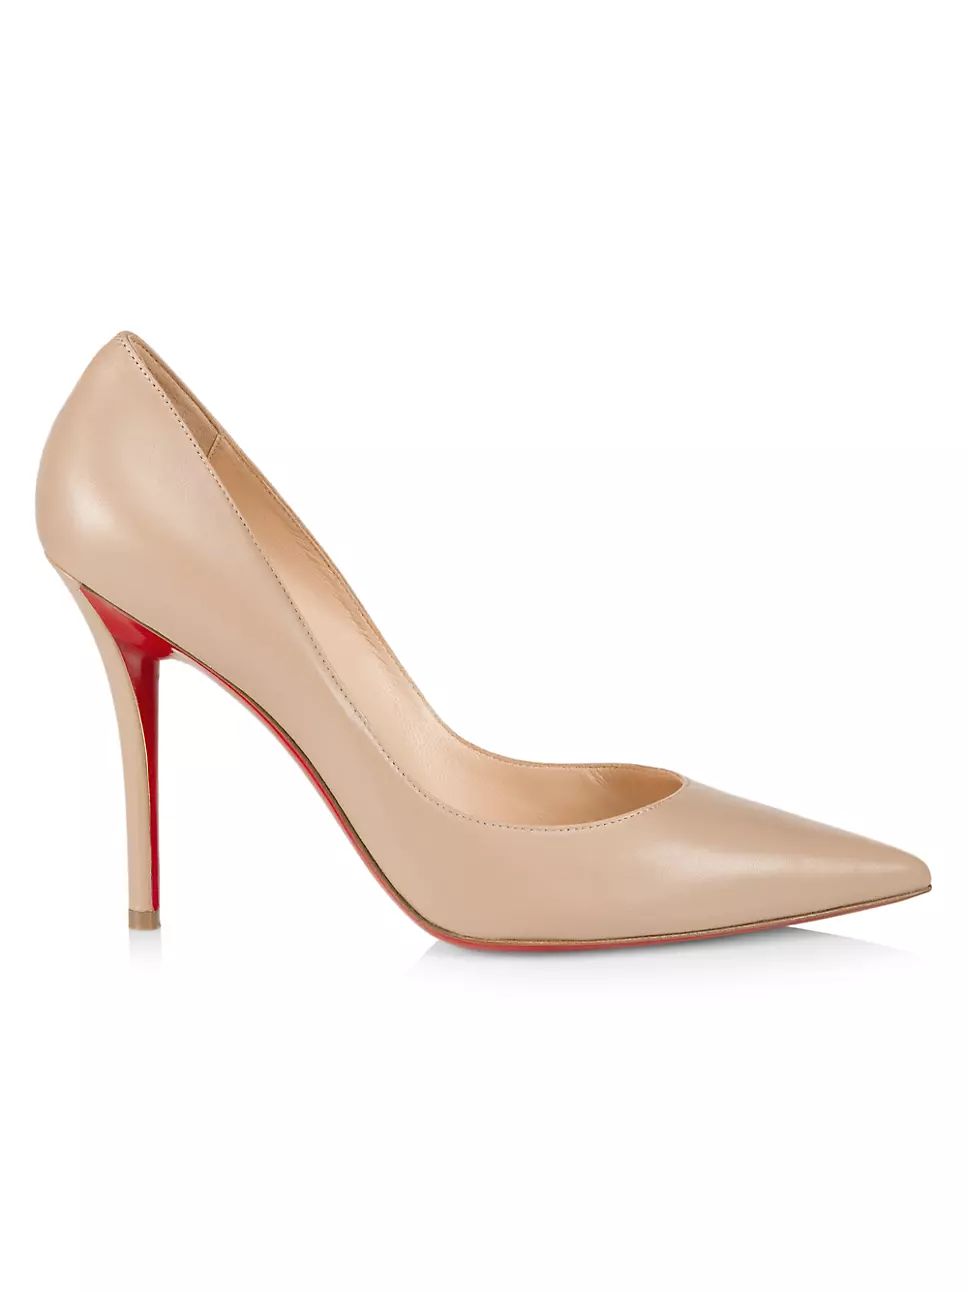 Apostrophy 100 Leather Pumps | Saks Fifth Avenue